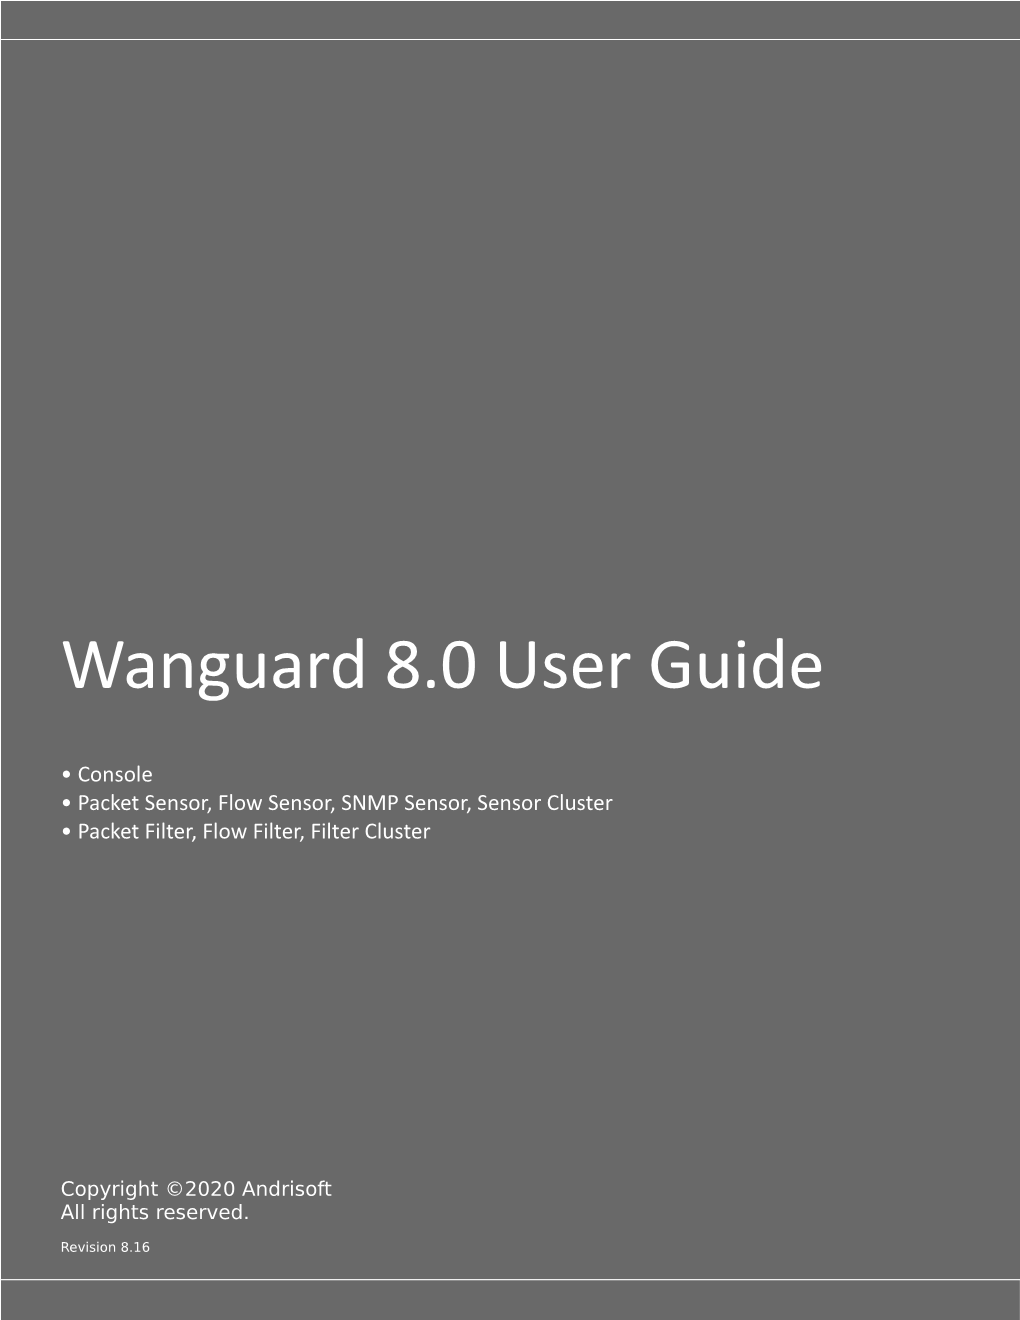 Ddos Mitigation with Wanguard Filter